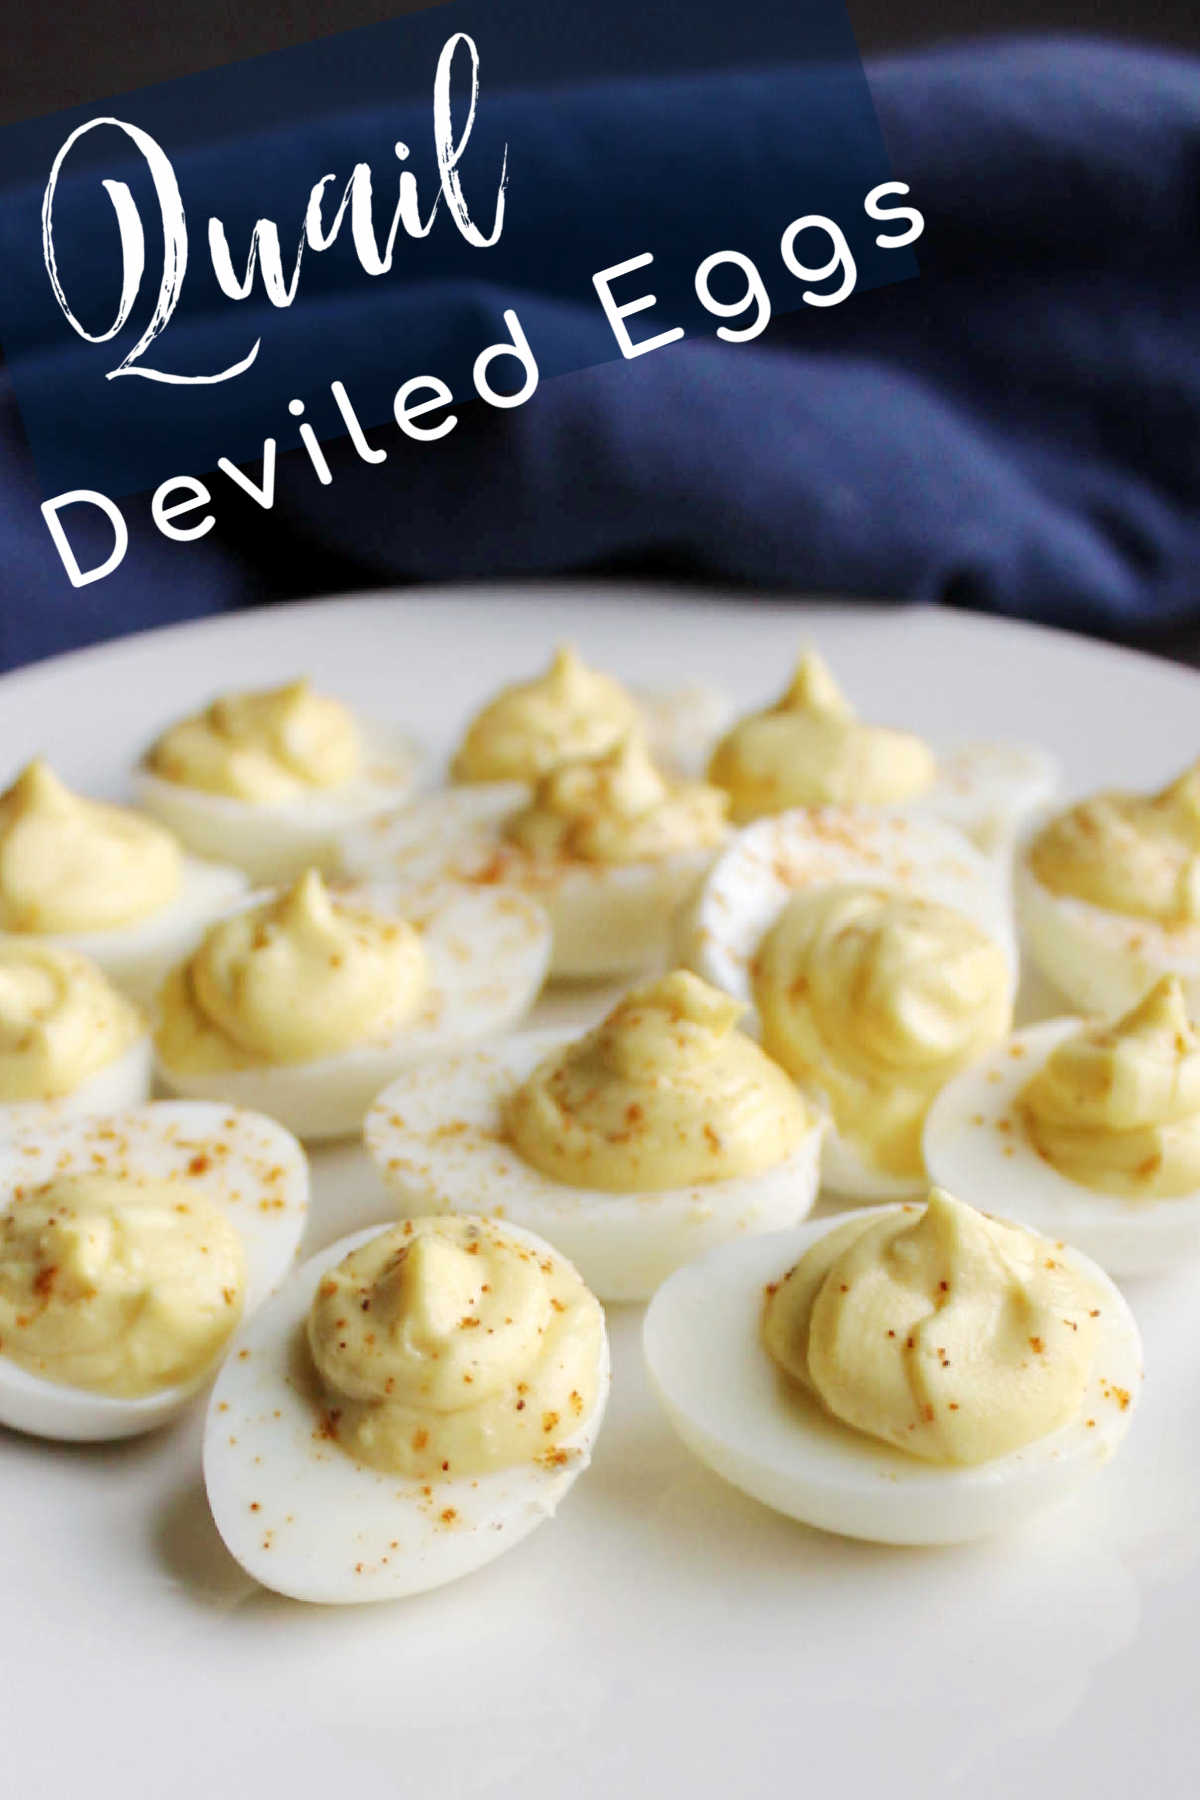 Cute little bite sized deviled quail eggs are tasty and fun. They just like a classic deviled egg but teeny tiny.